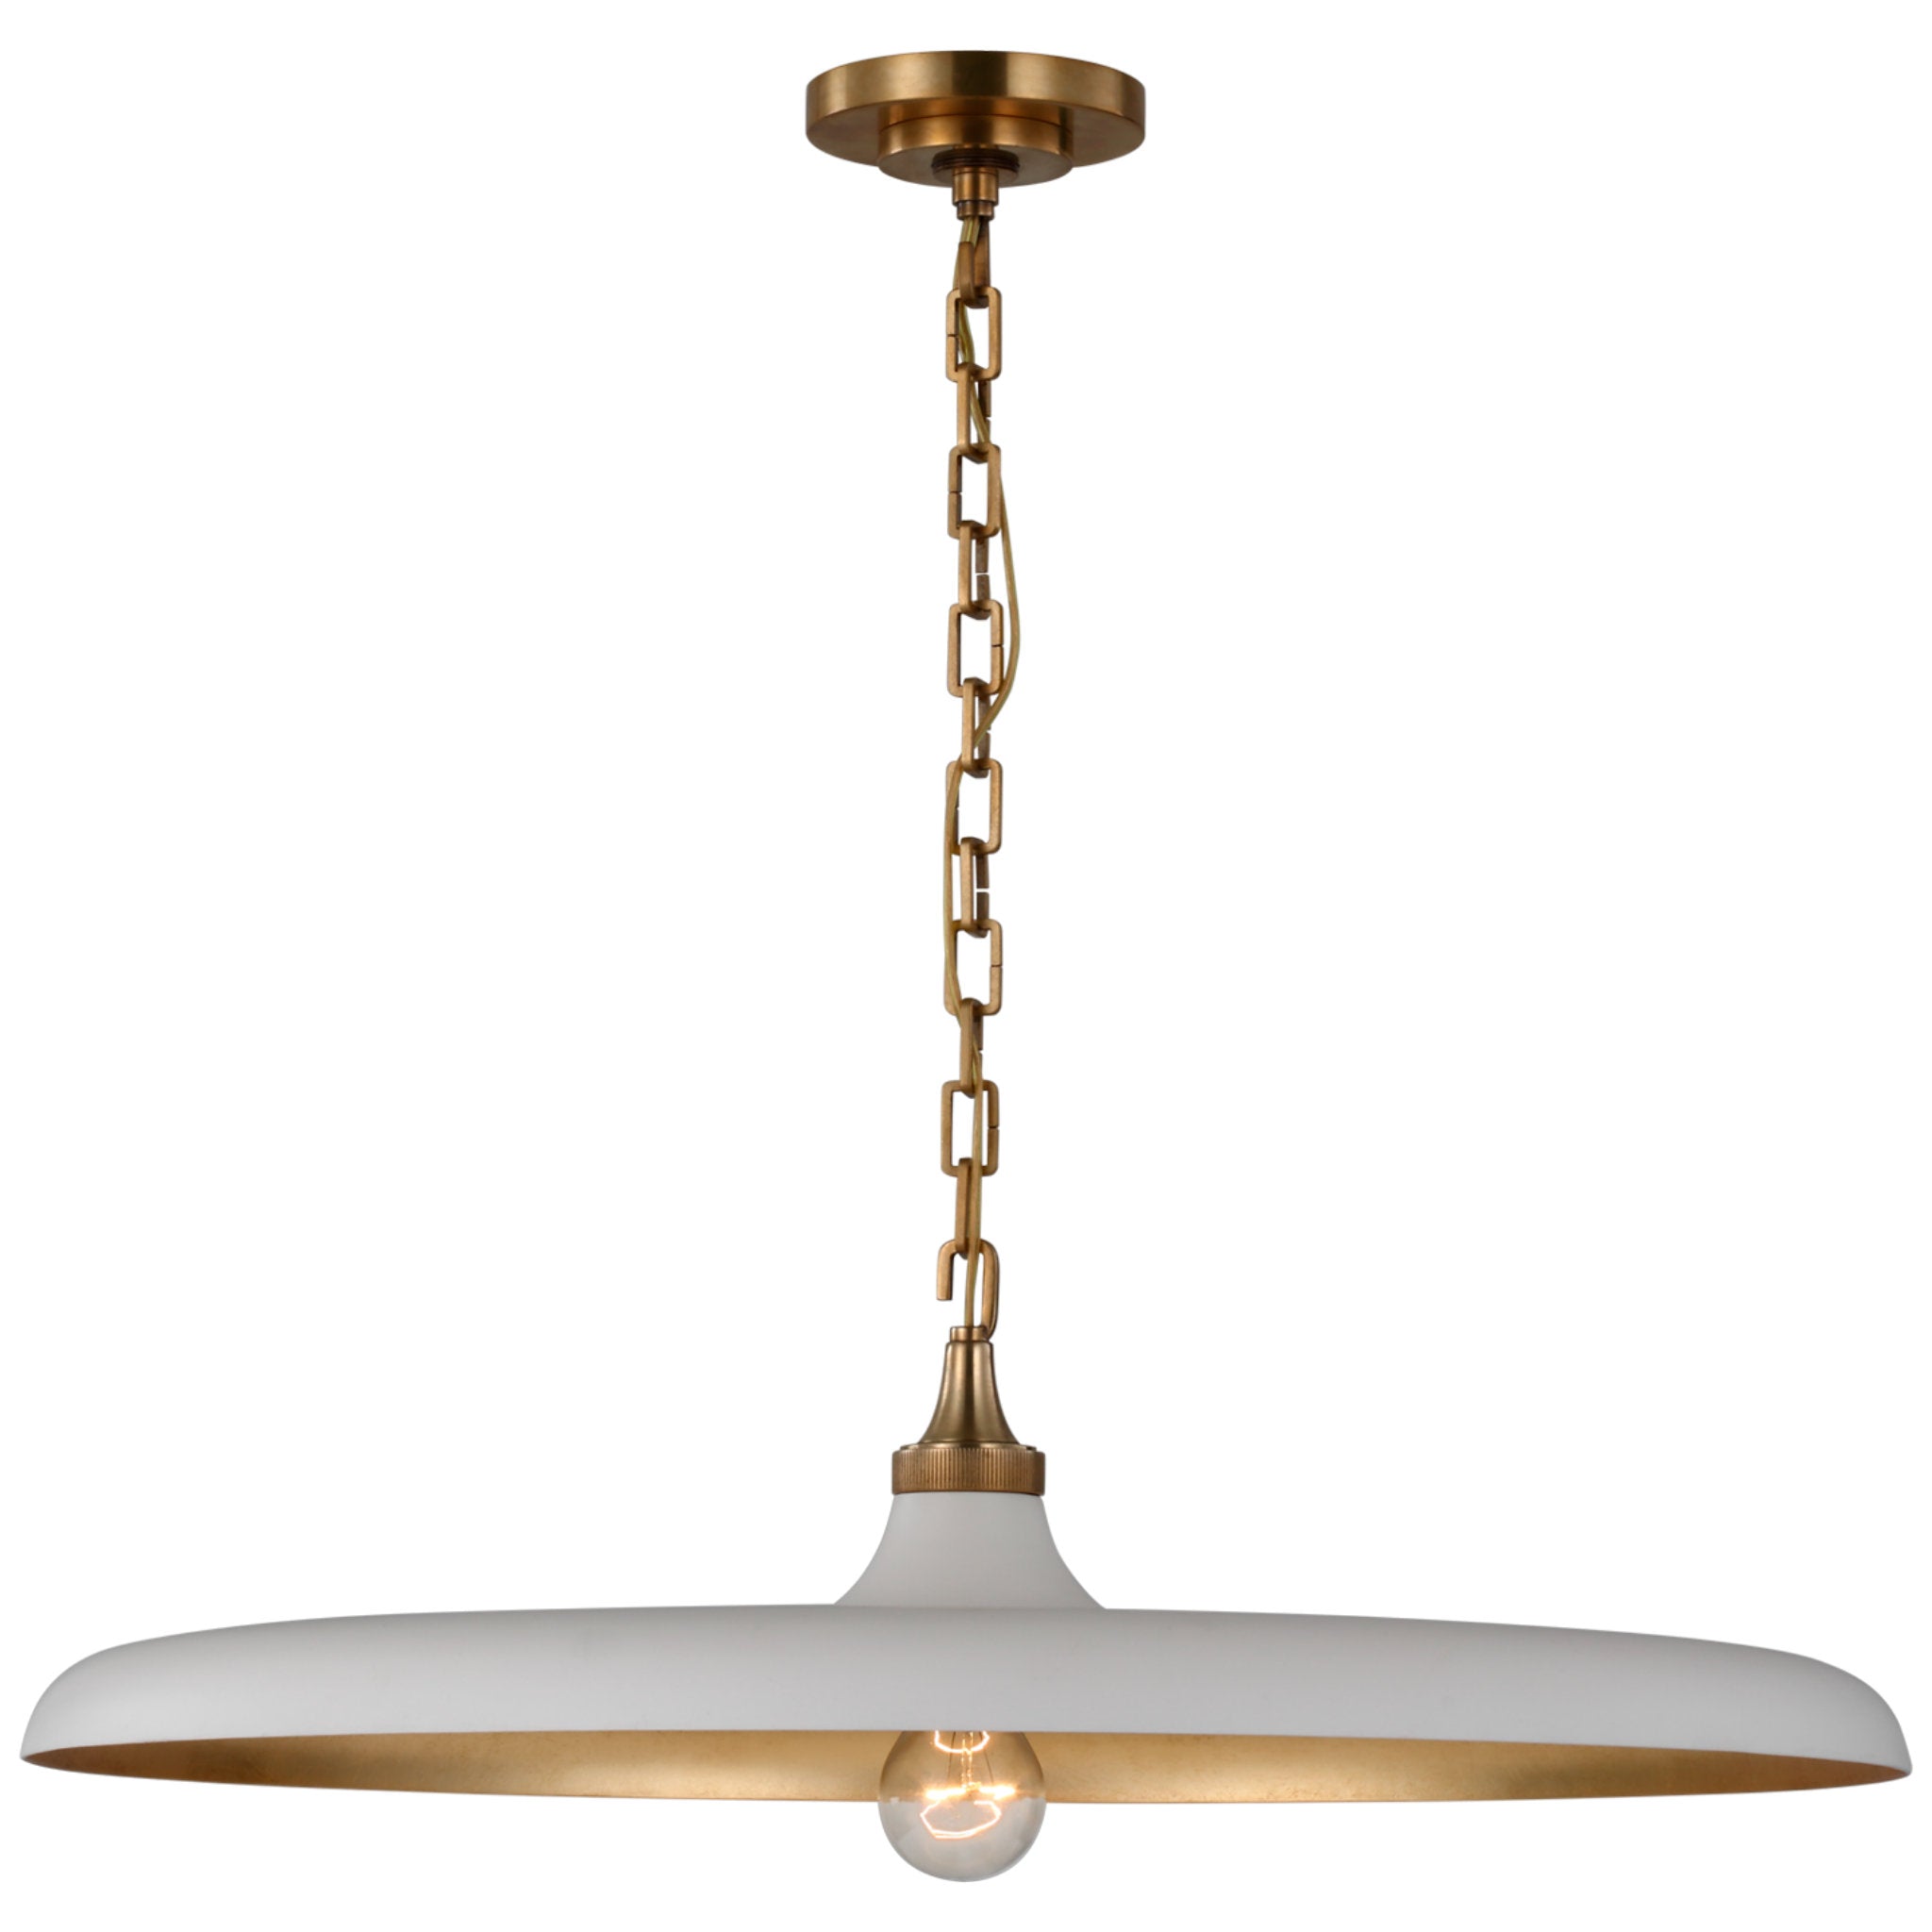 Thomas O'Brien Piatto Large Pendant in Hand-Rubbed Antique Brass with Plaster White Shade